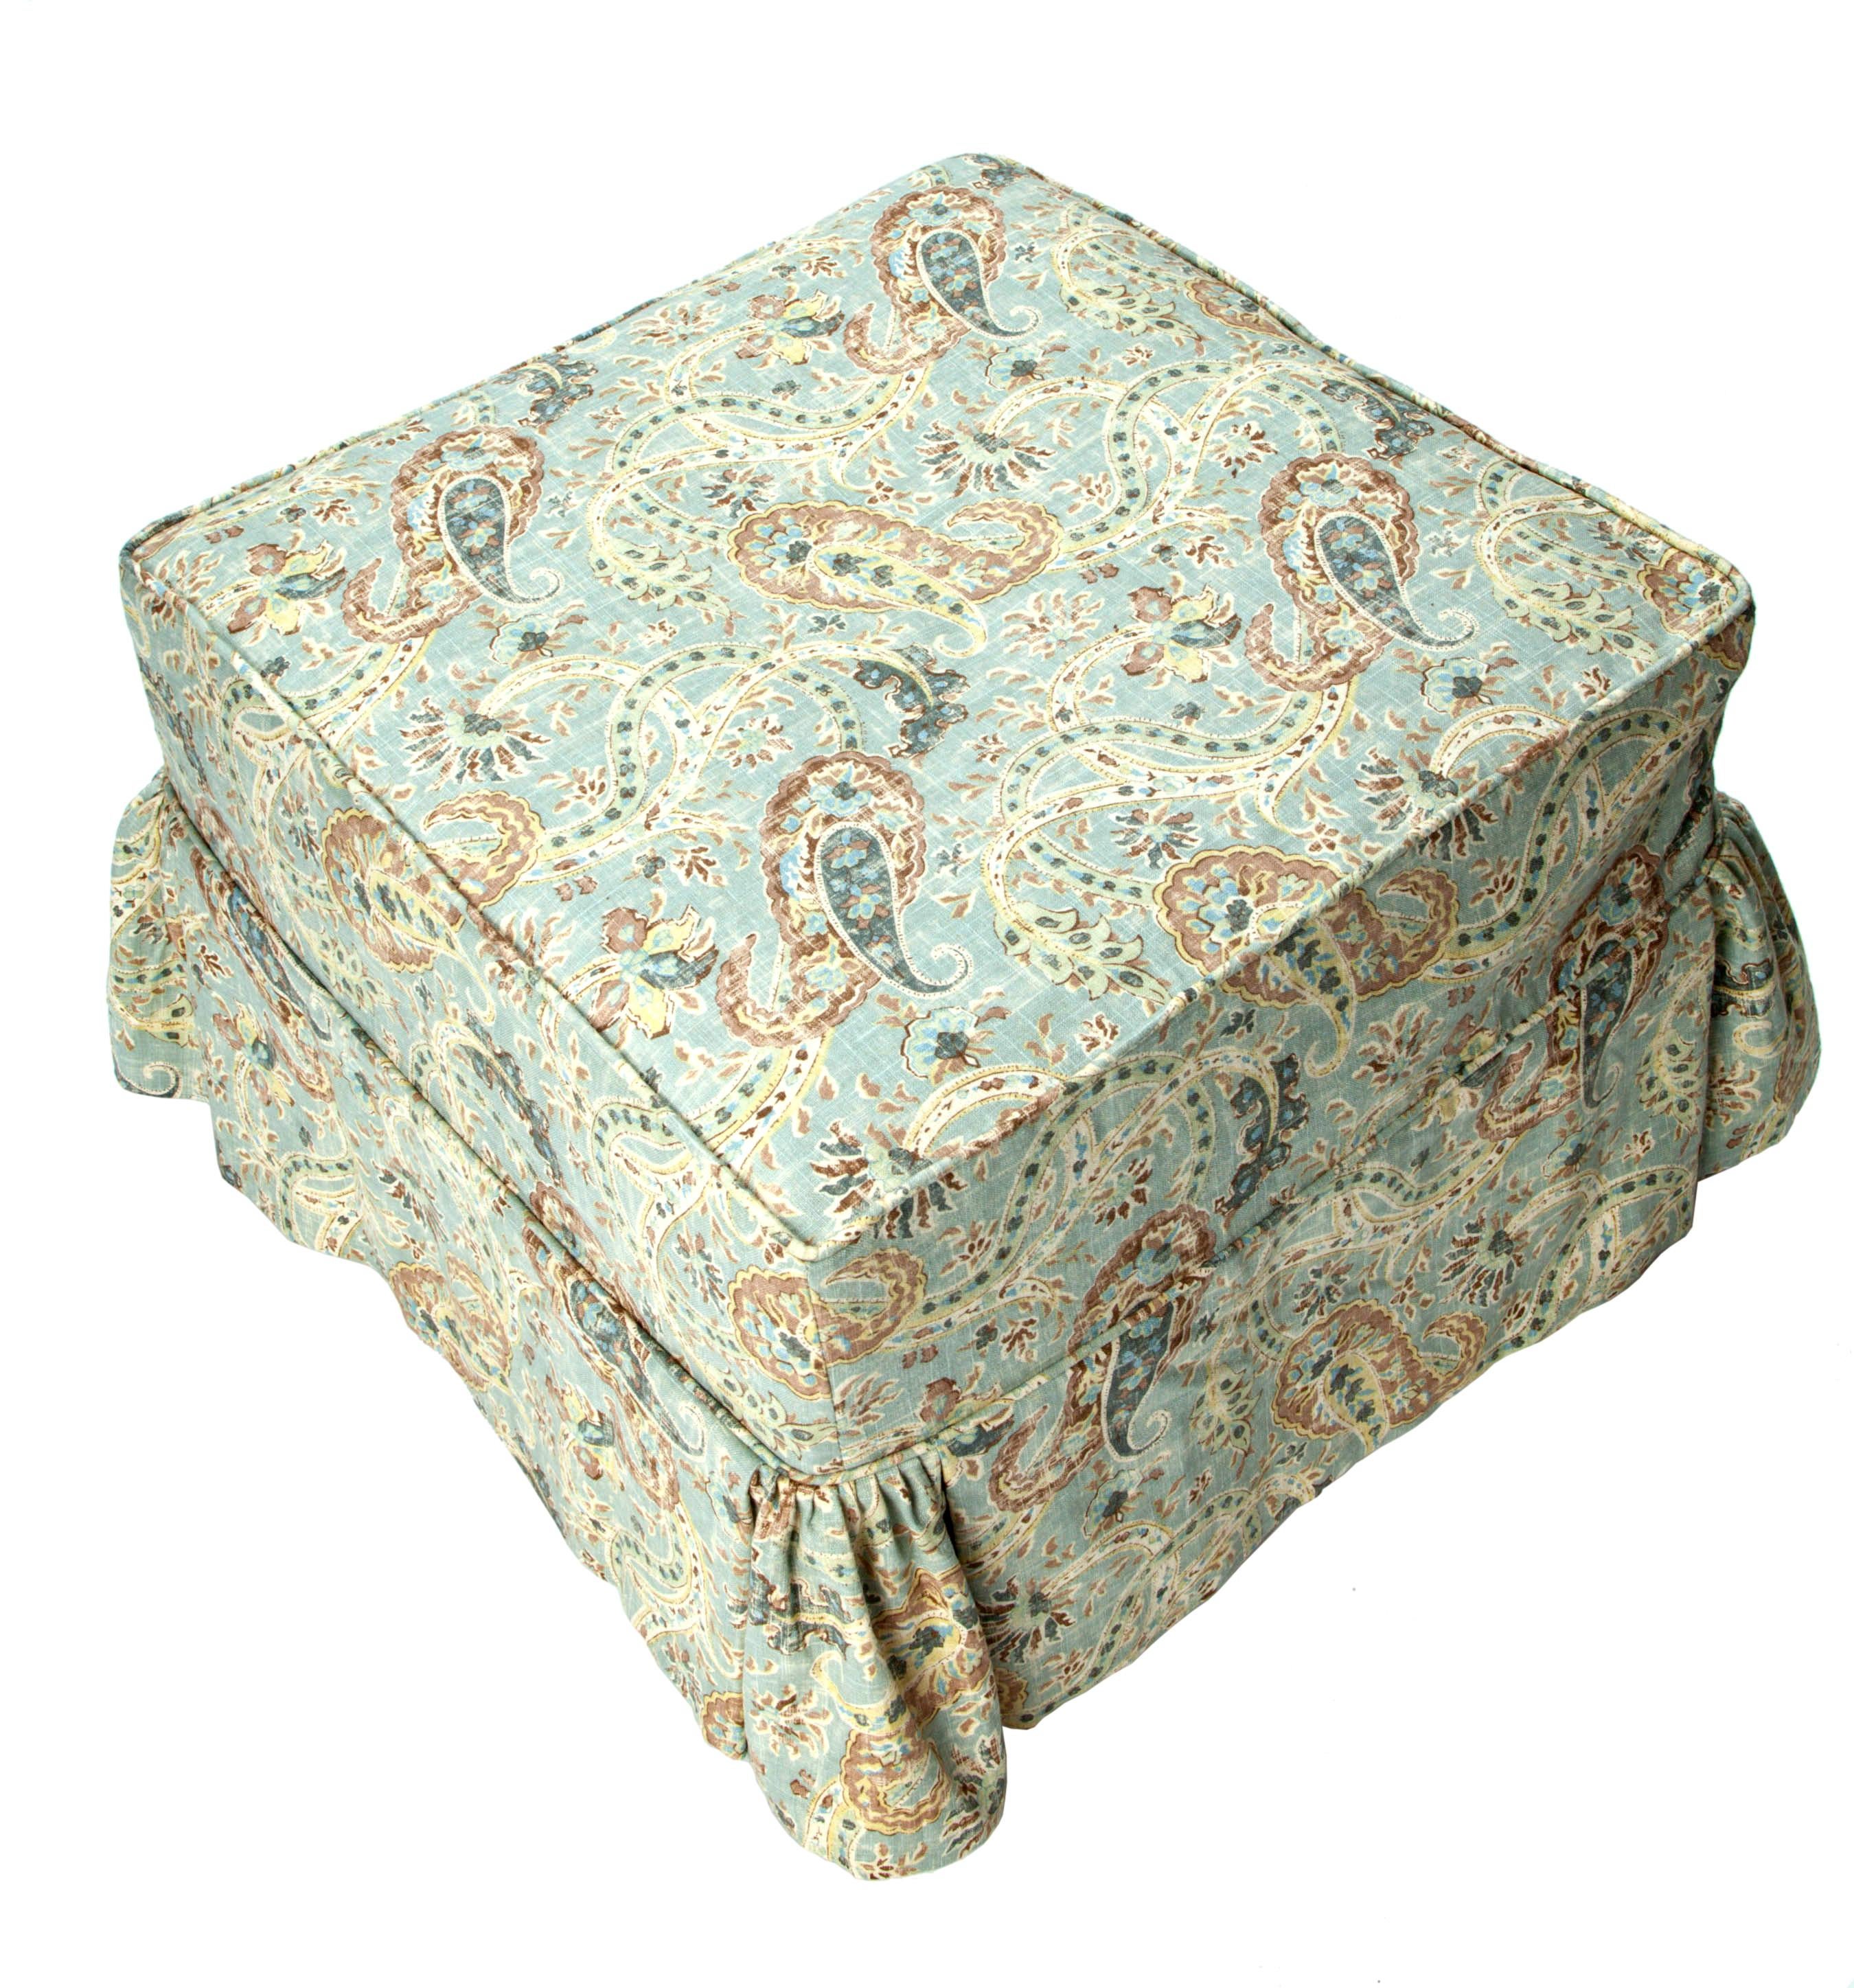 Linen Paisley Slipcovered Ottoman In Good Condition For Sale In Malibu, CA